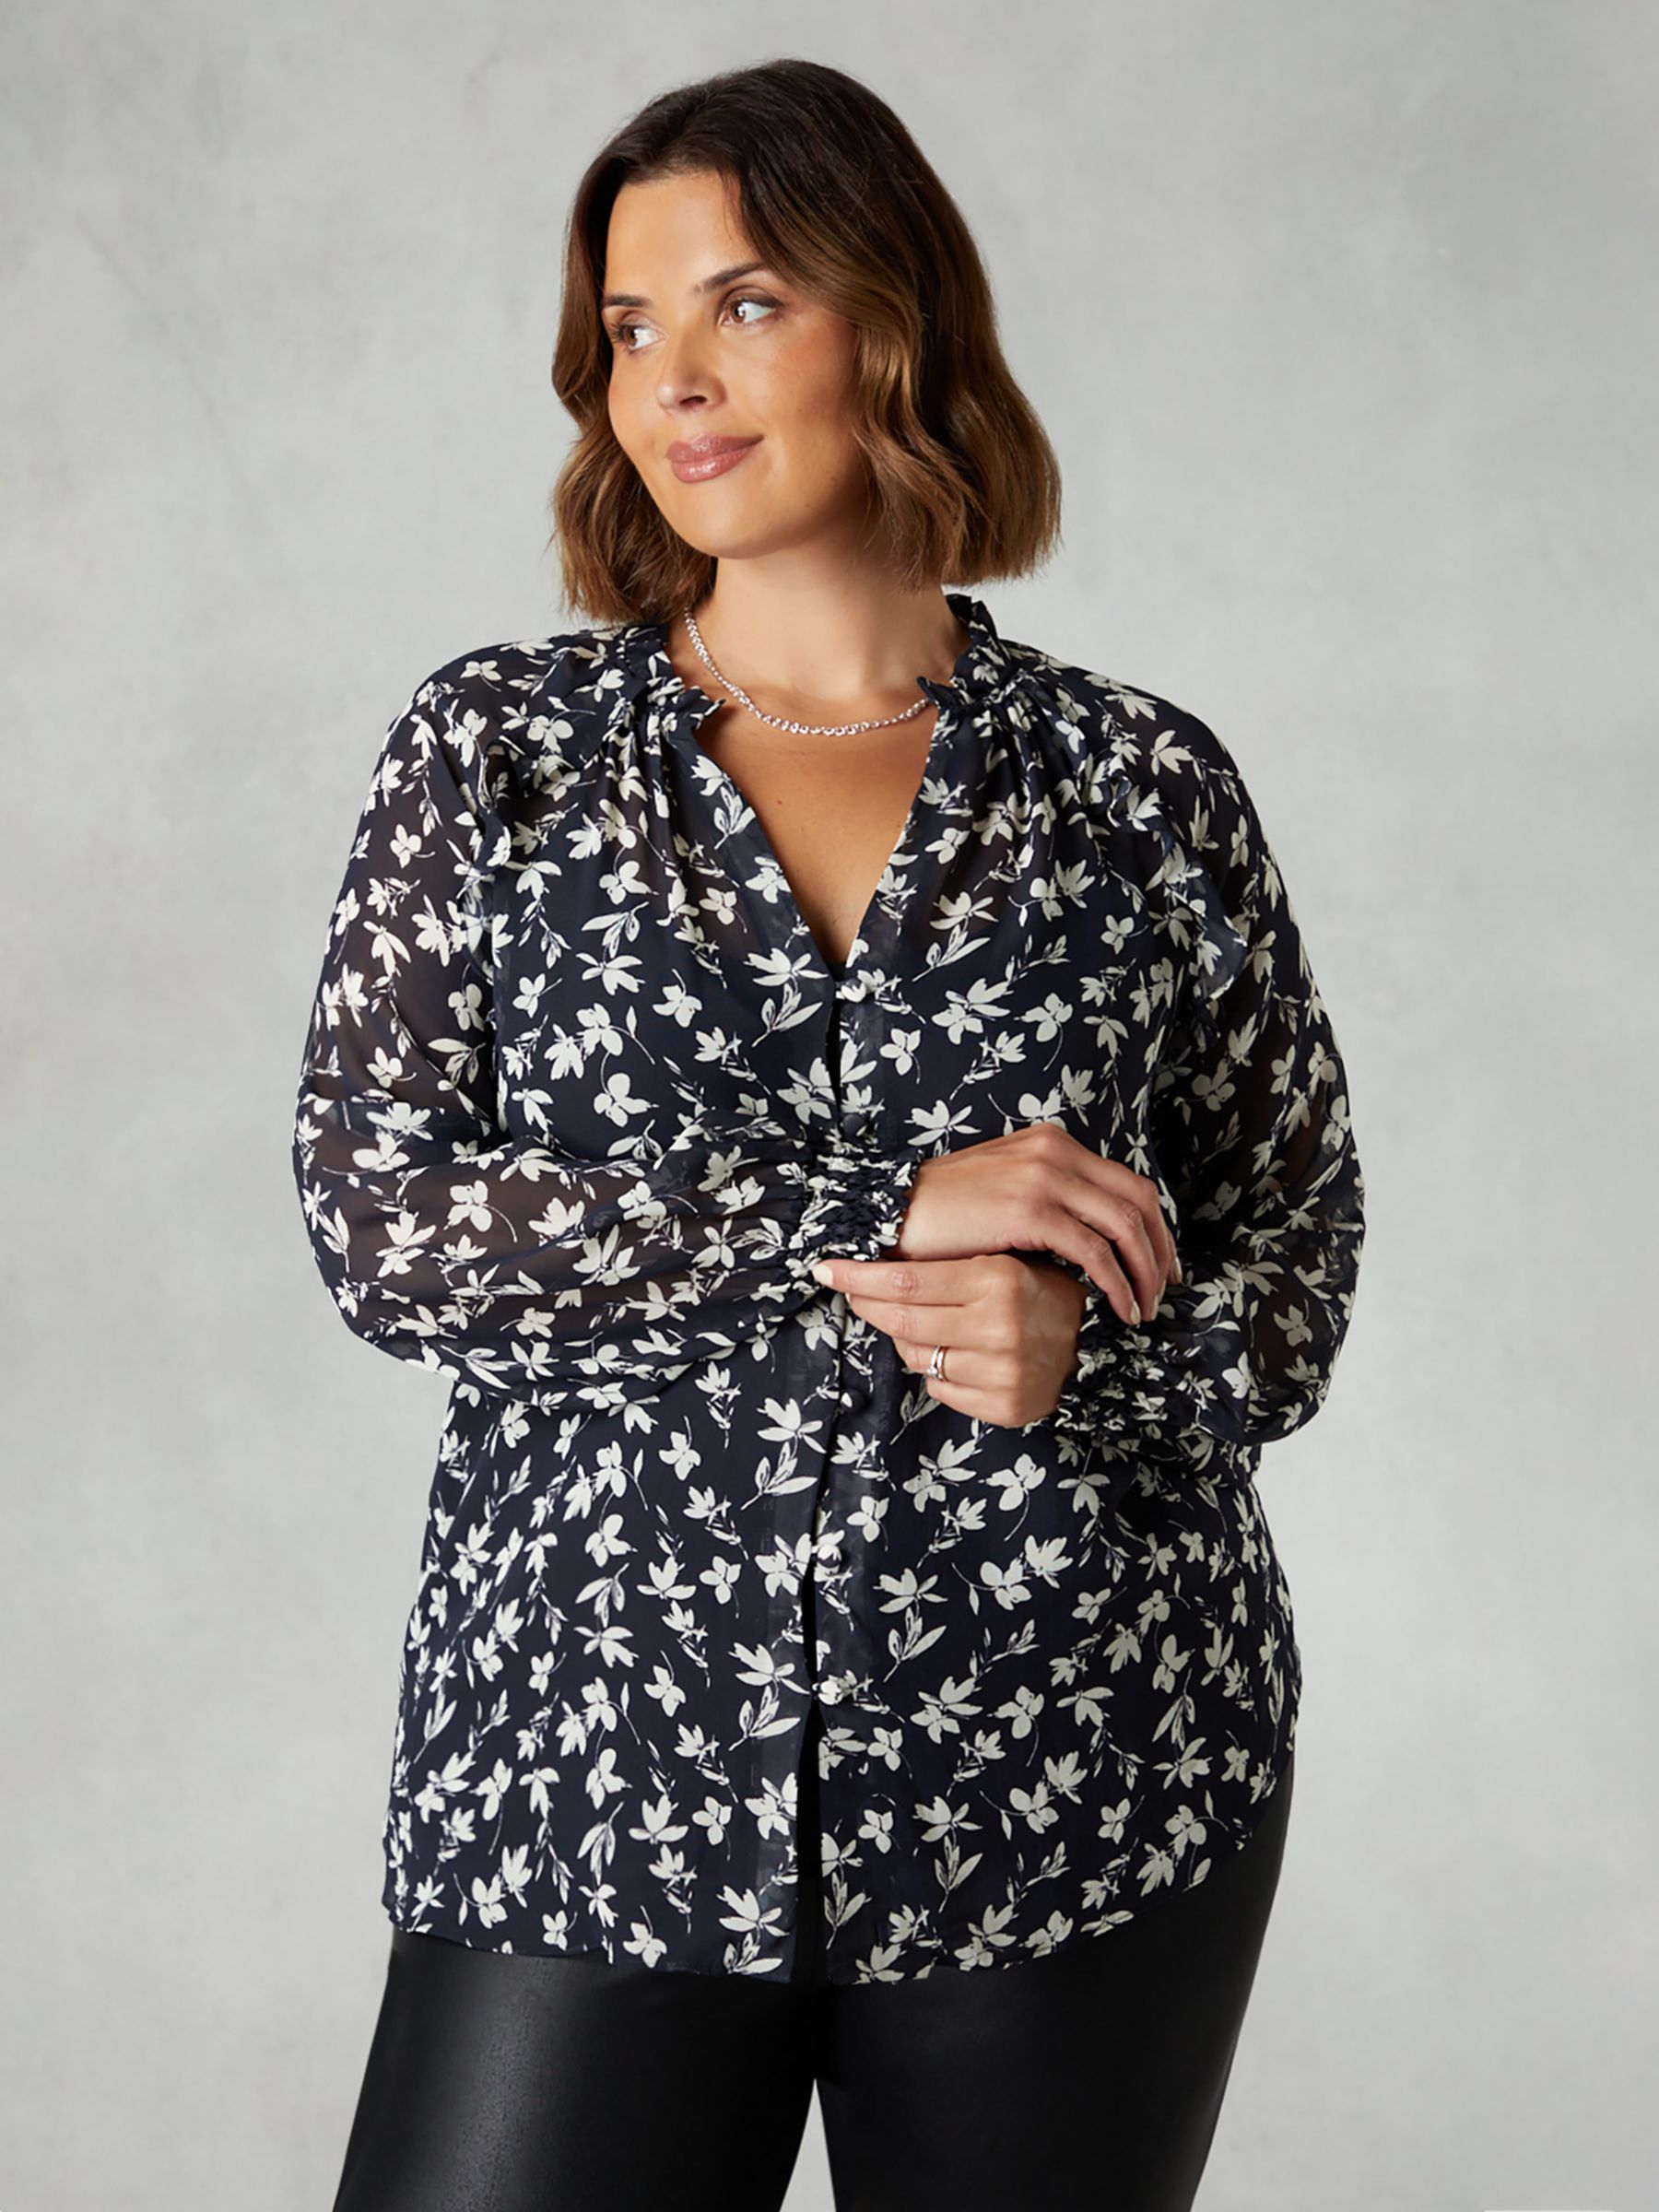 Buy Live Unlimited Curve Floral Print Ruffle Front Blouse, Black/White Online at johnlewis.com